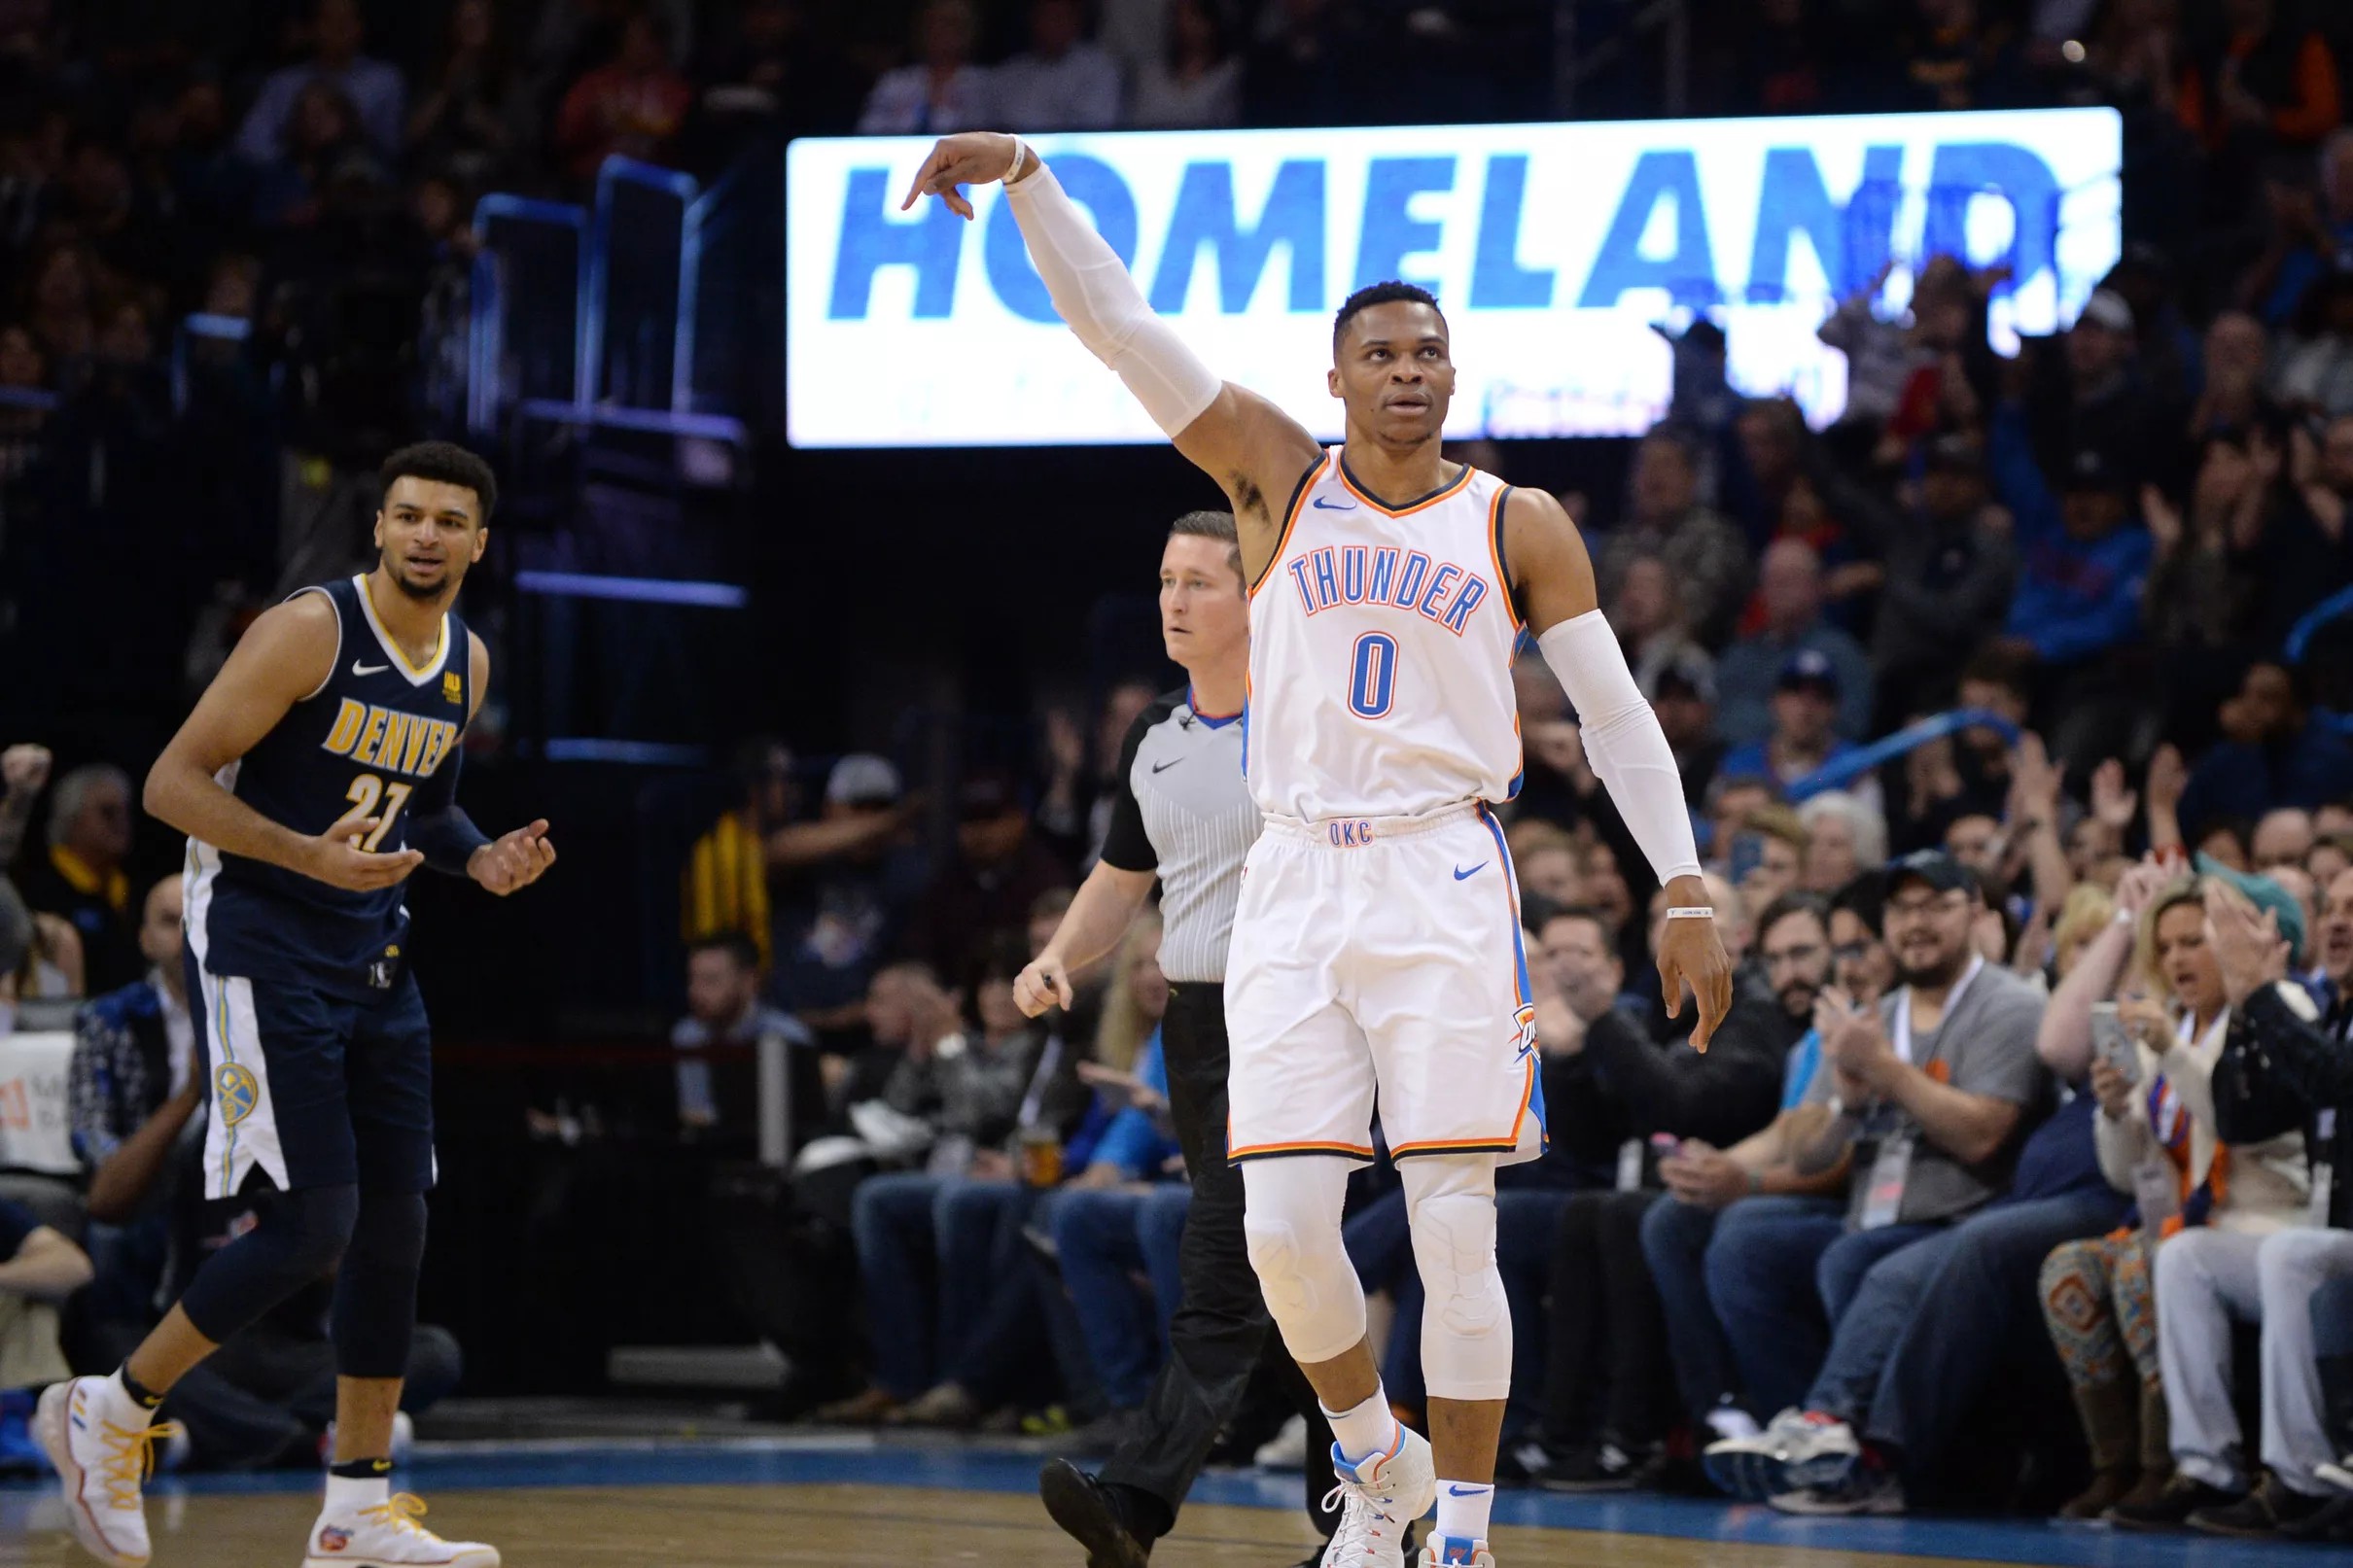 Thunder vs Nuggets, final score Russell Westbrook leads OKC to win, 9594